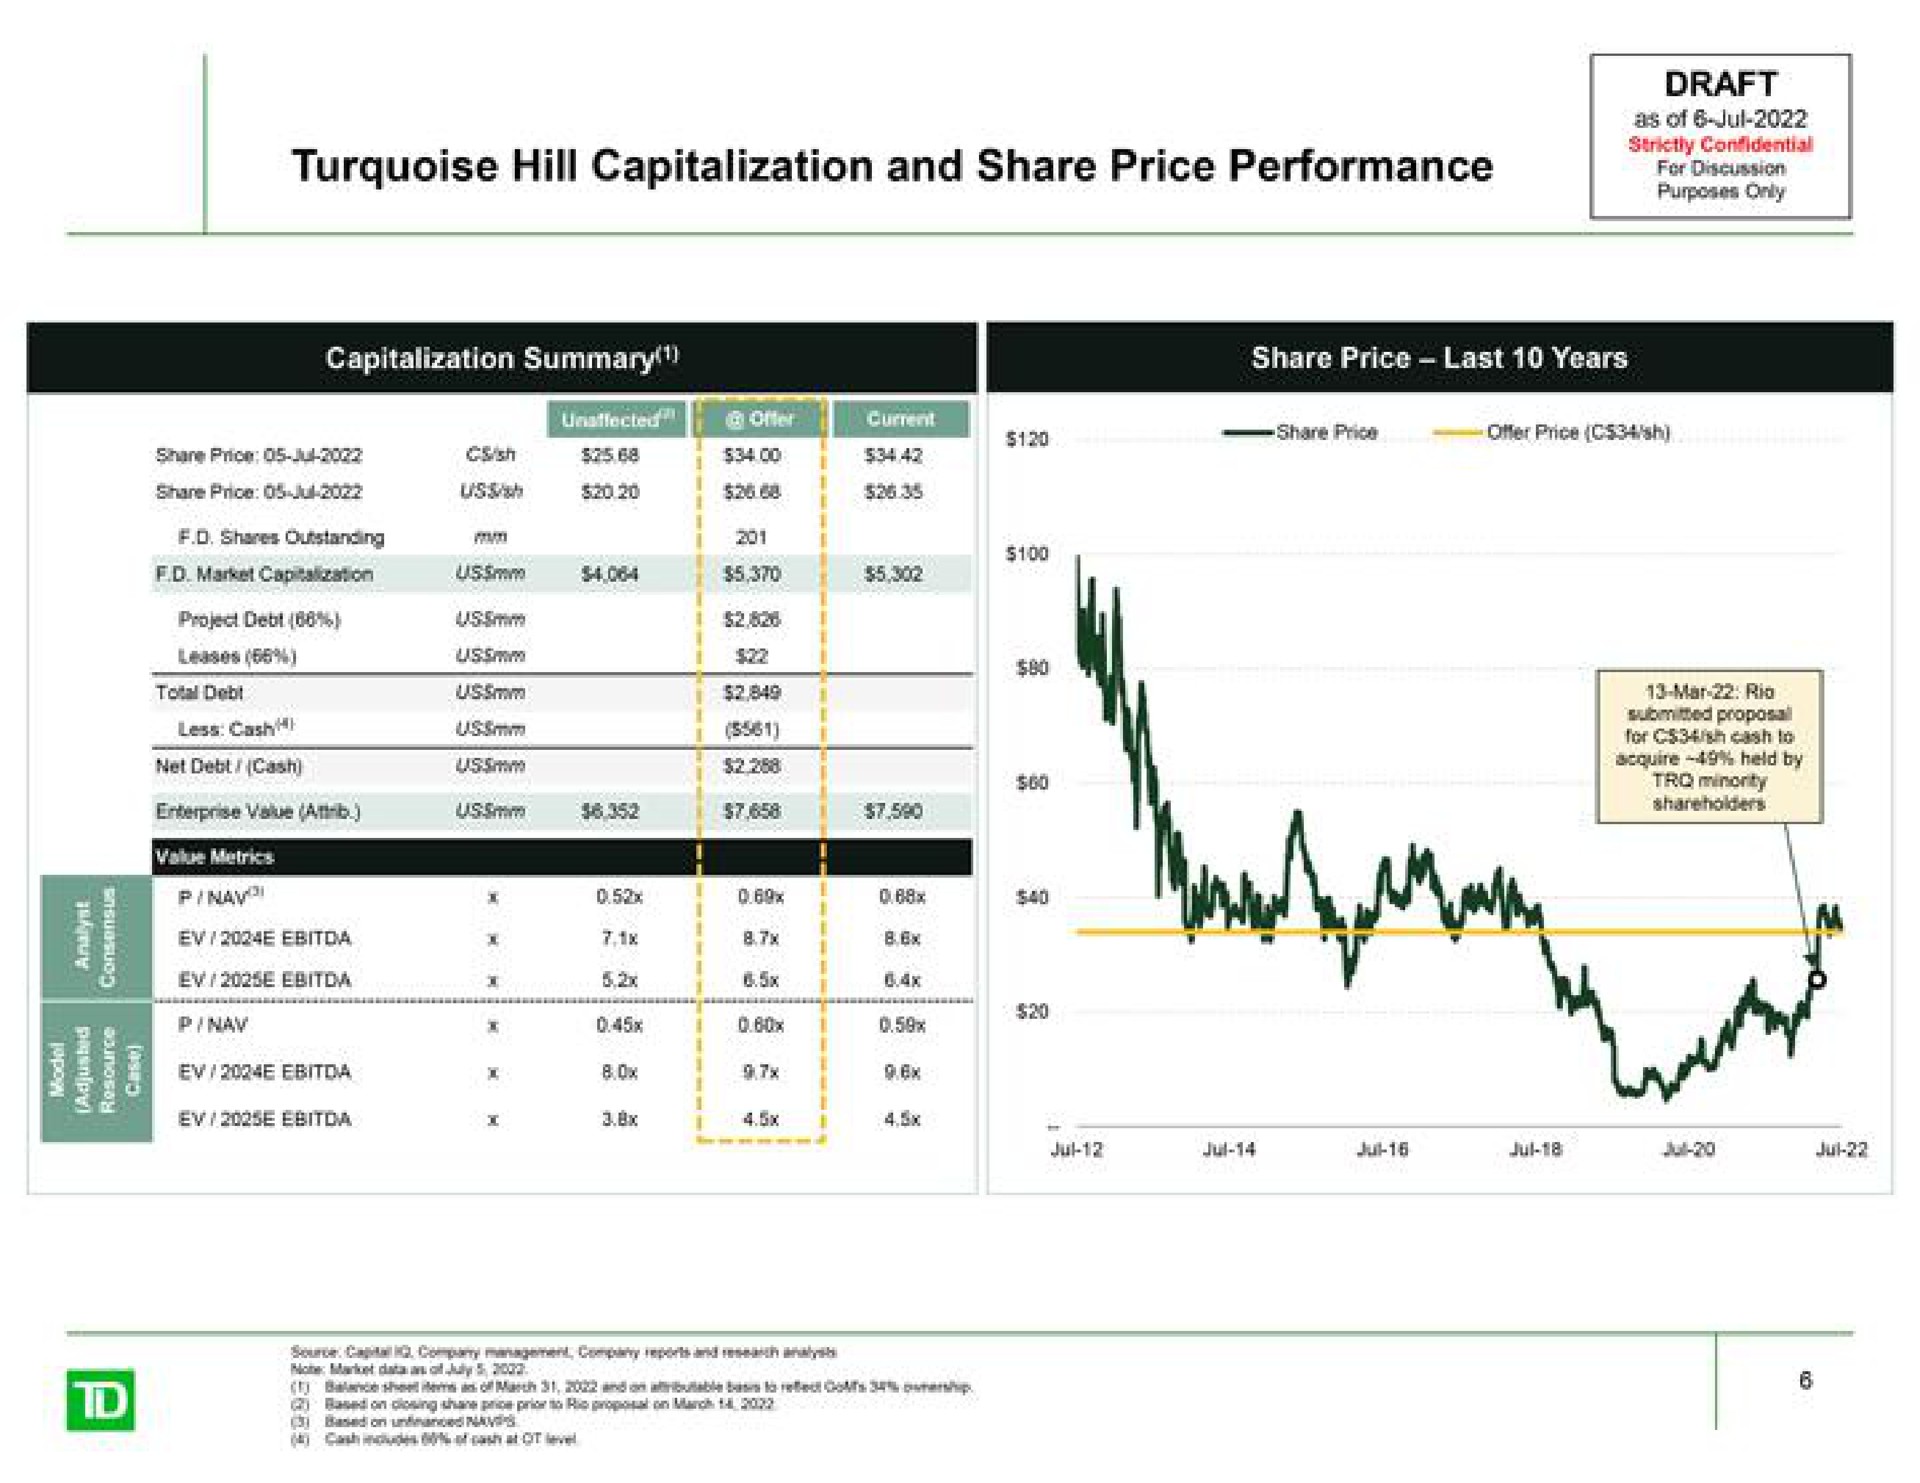 turquoise hill capitalization and share price performance draft as of may | TD Securities